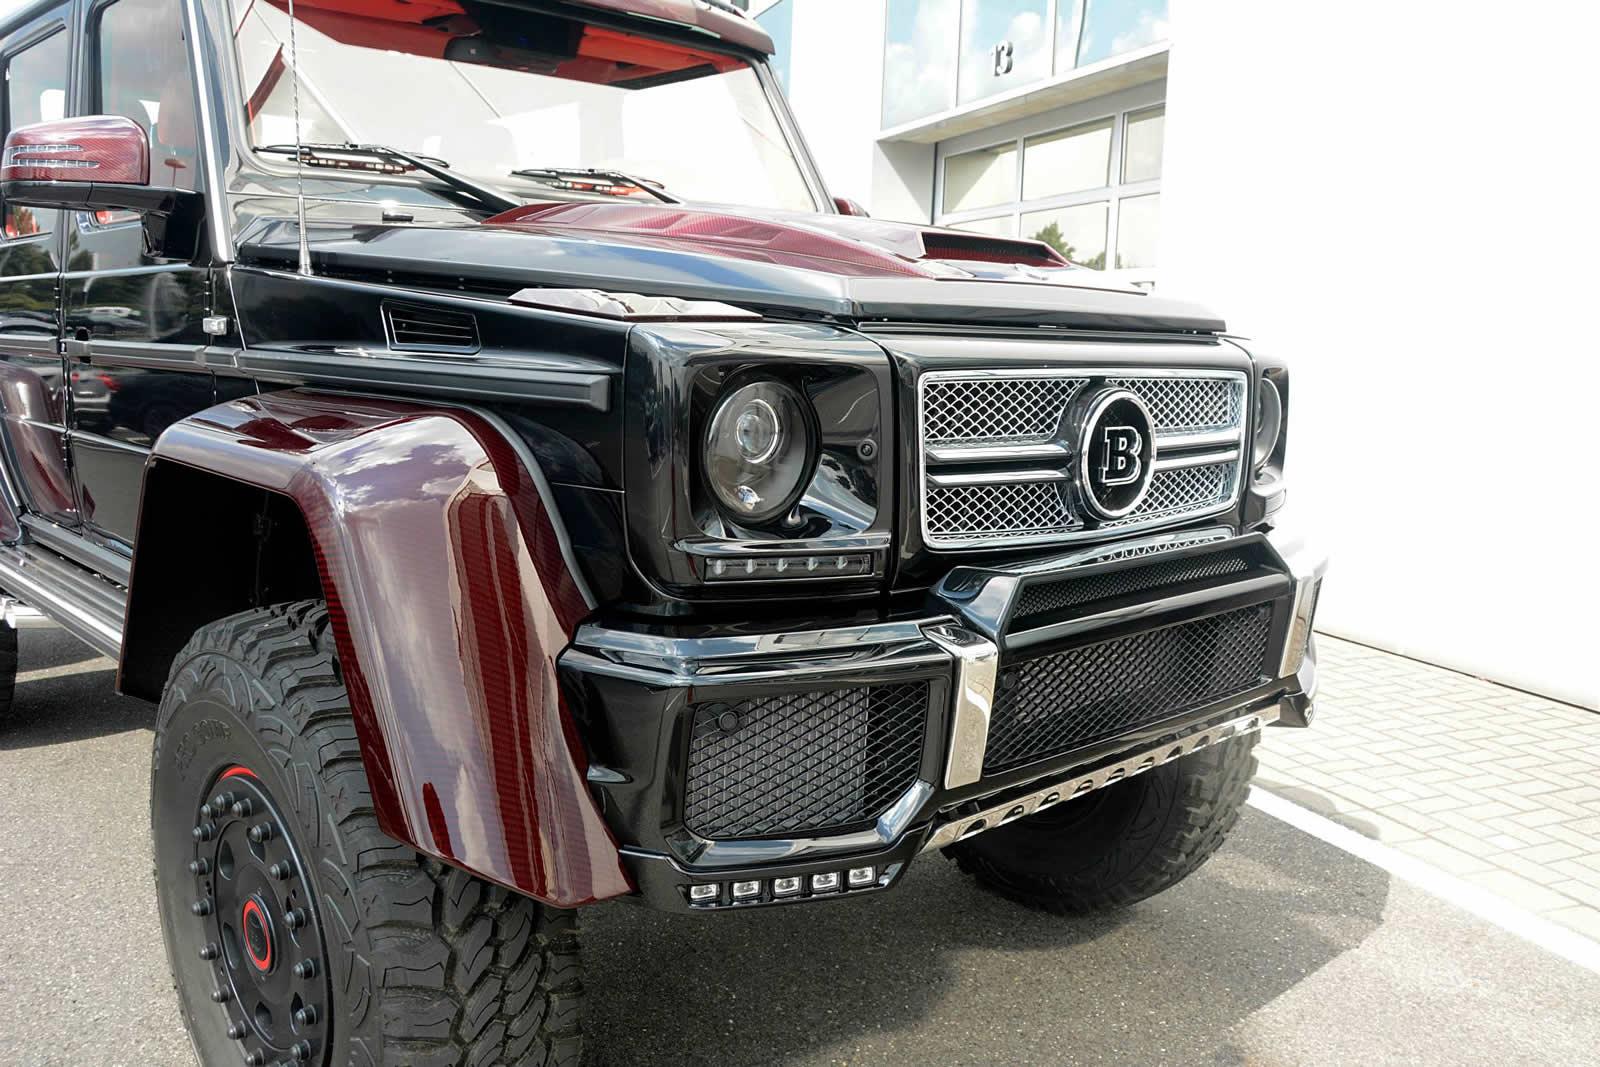 The Brabus B63s 700 6x6 Is Technically Illegal In China Mbworld